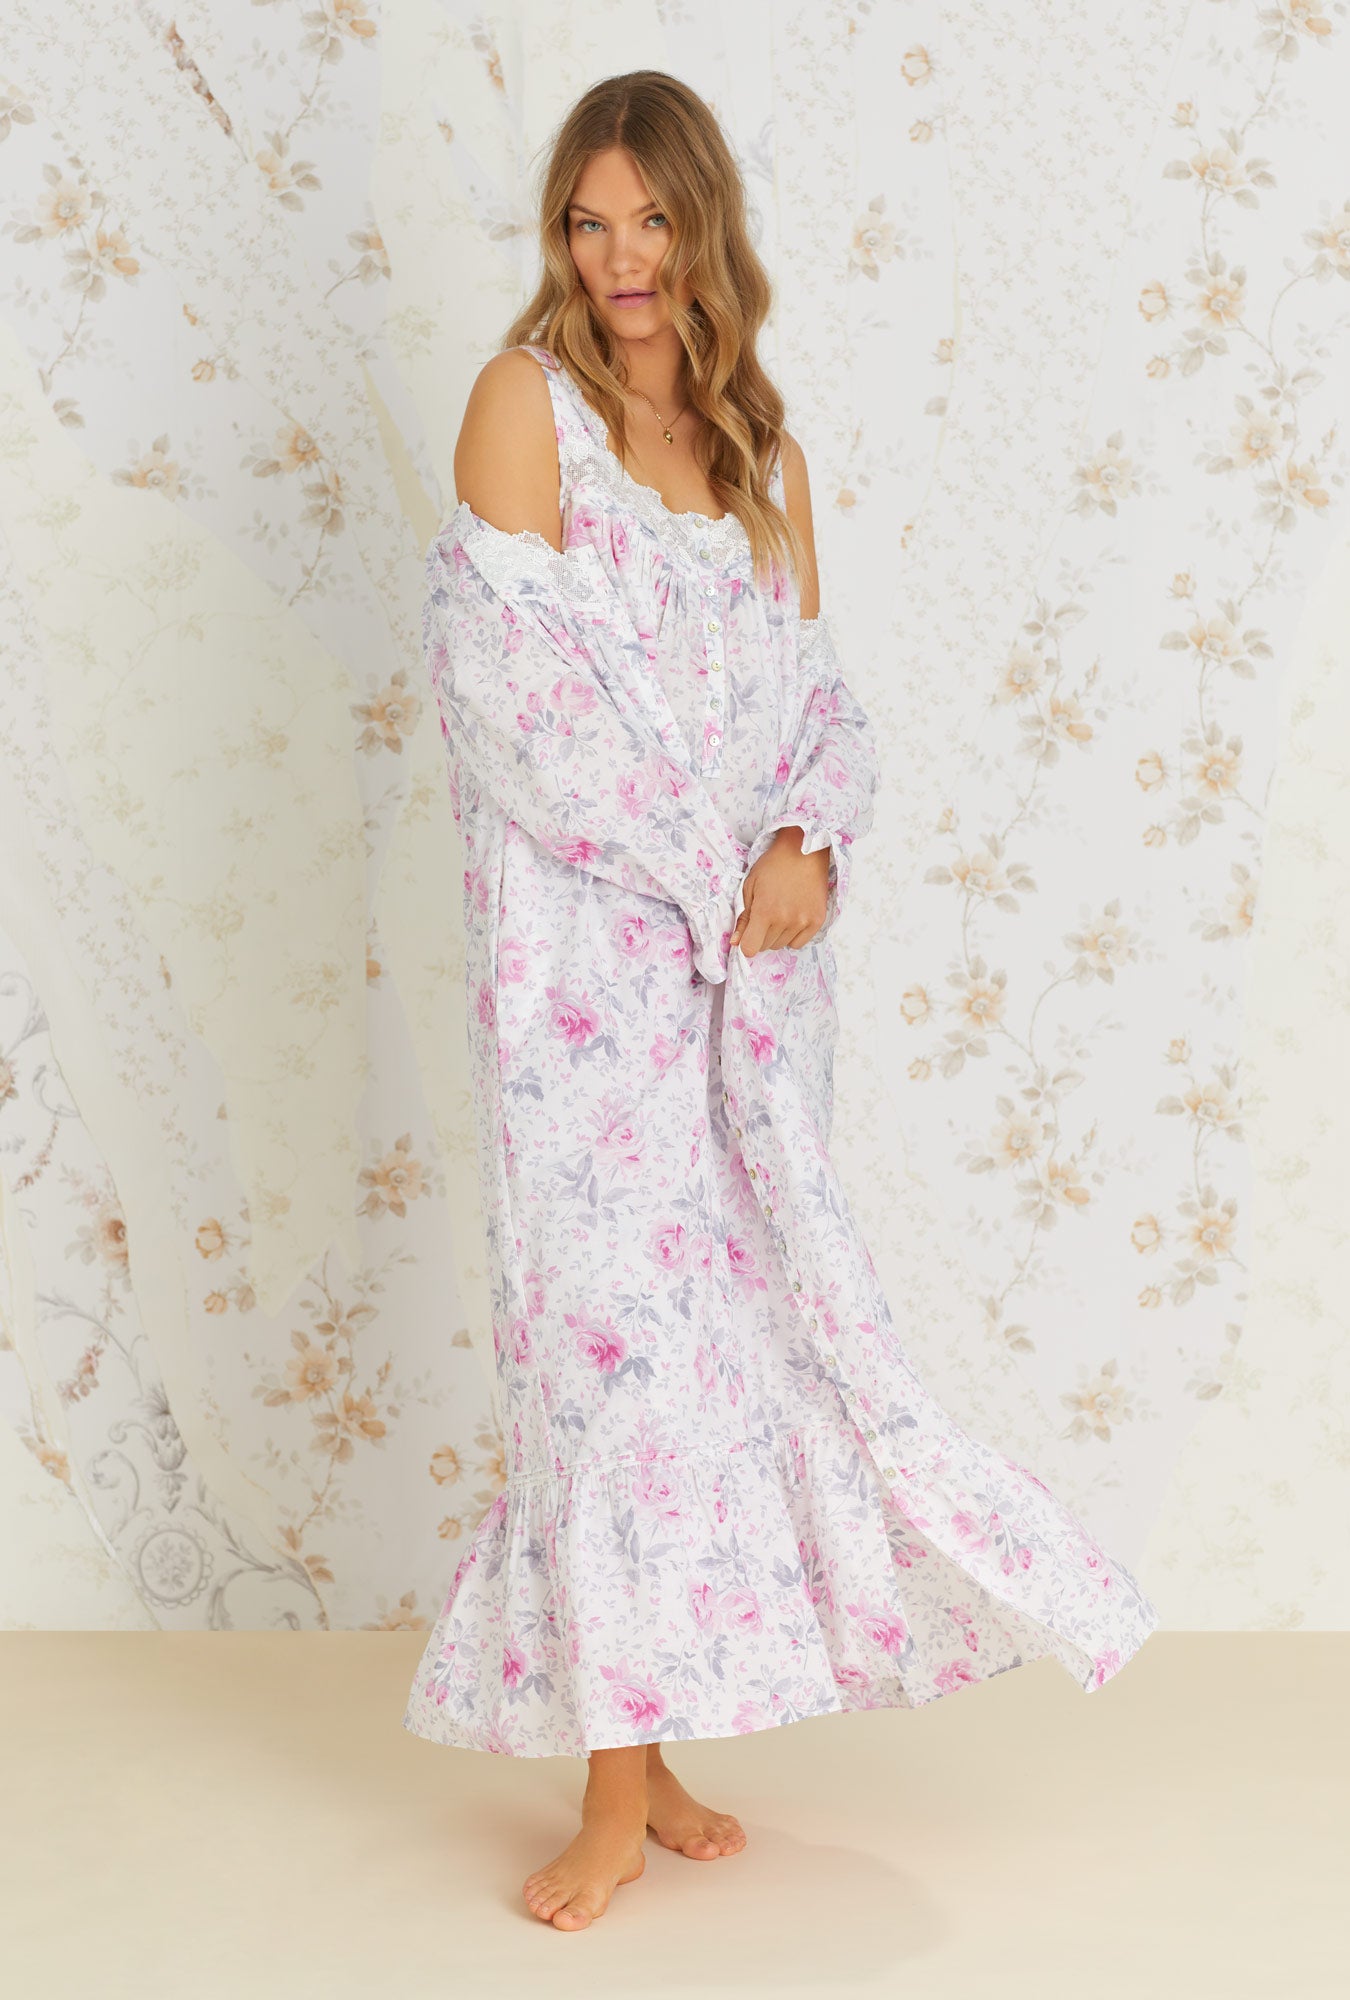 A lady wearing white sleeveless cotton nightgown with mendocino rose print.